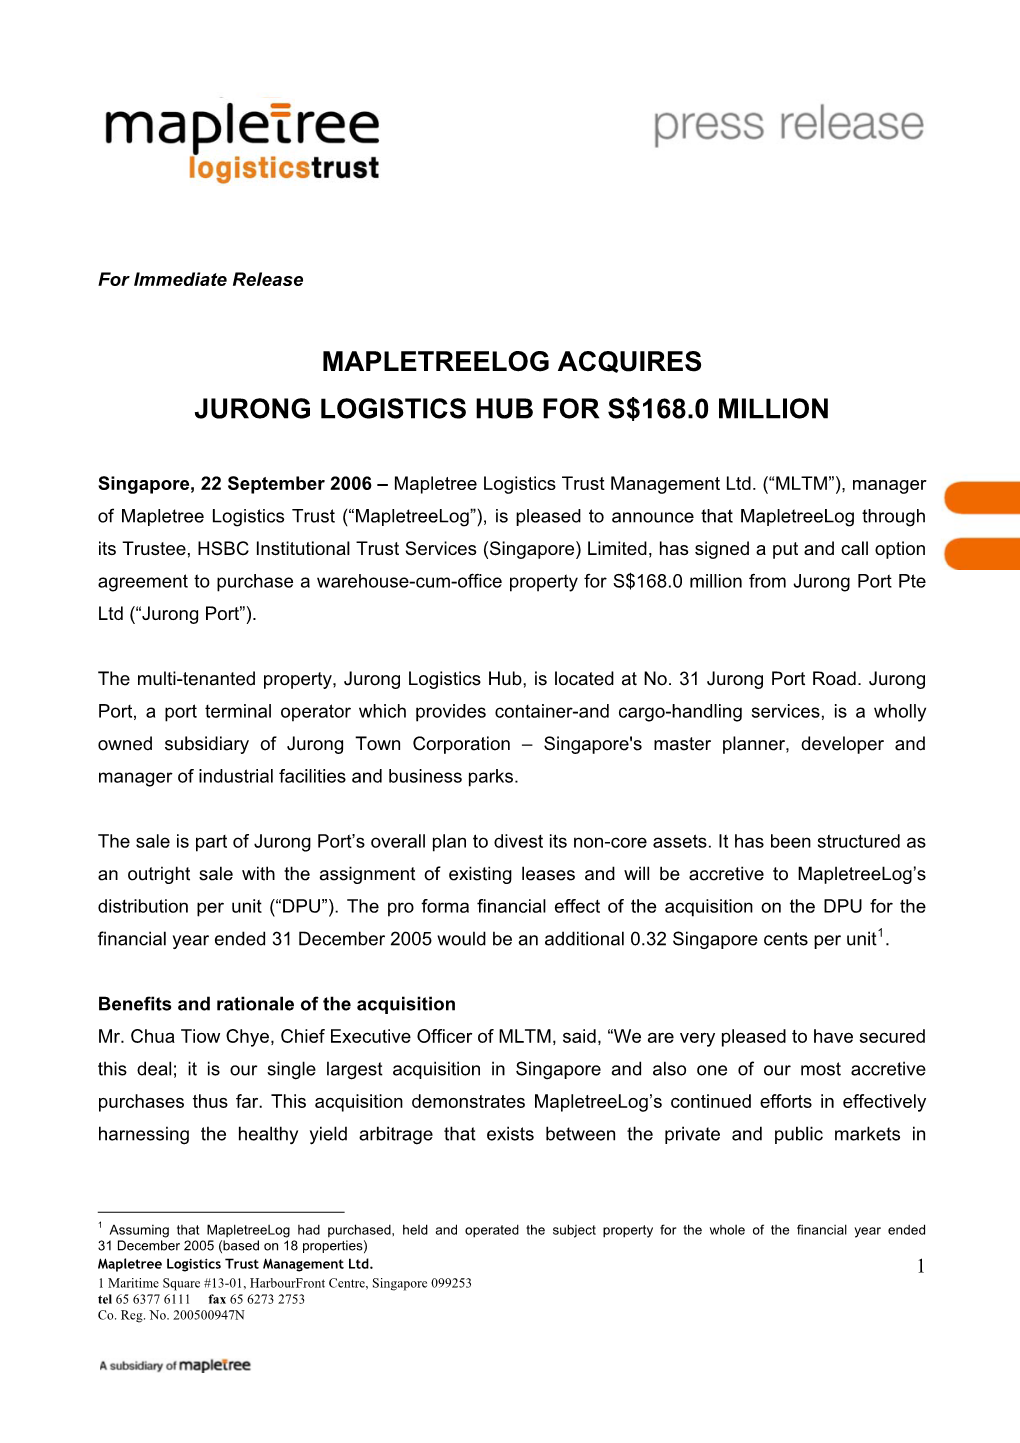 Mapletreelog Acquires Jurong Logistics Hub for S$168.0 Million